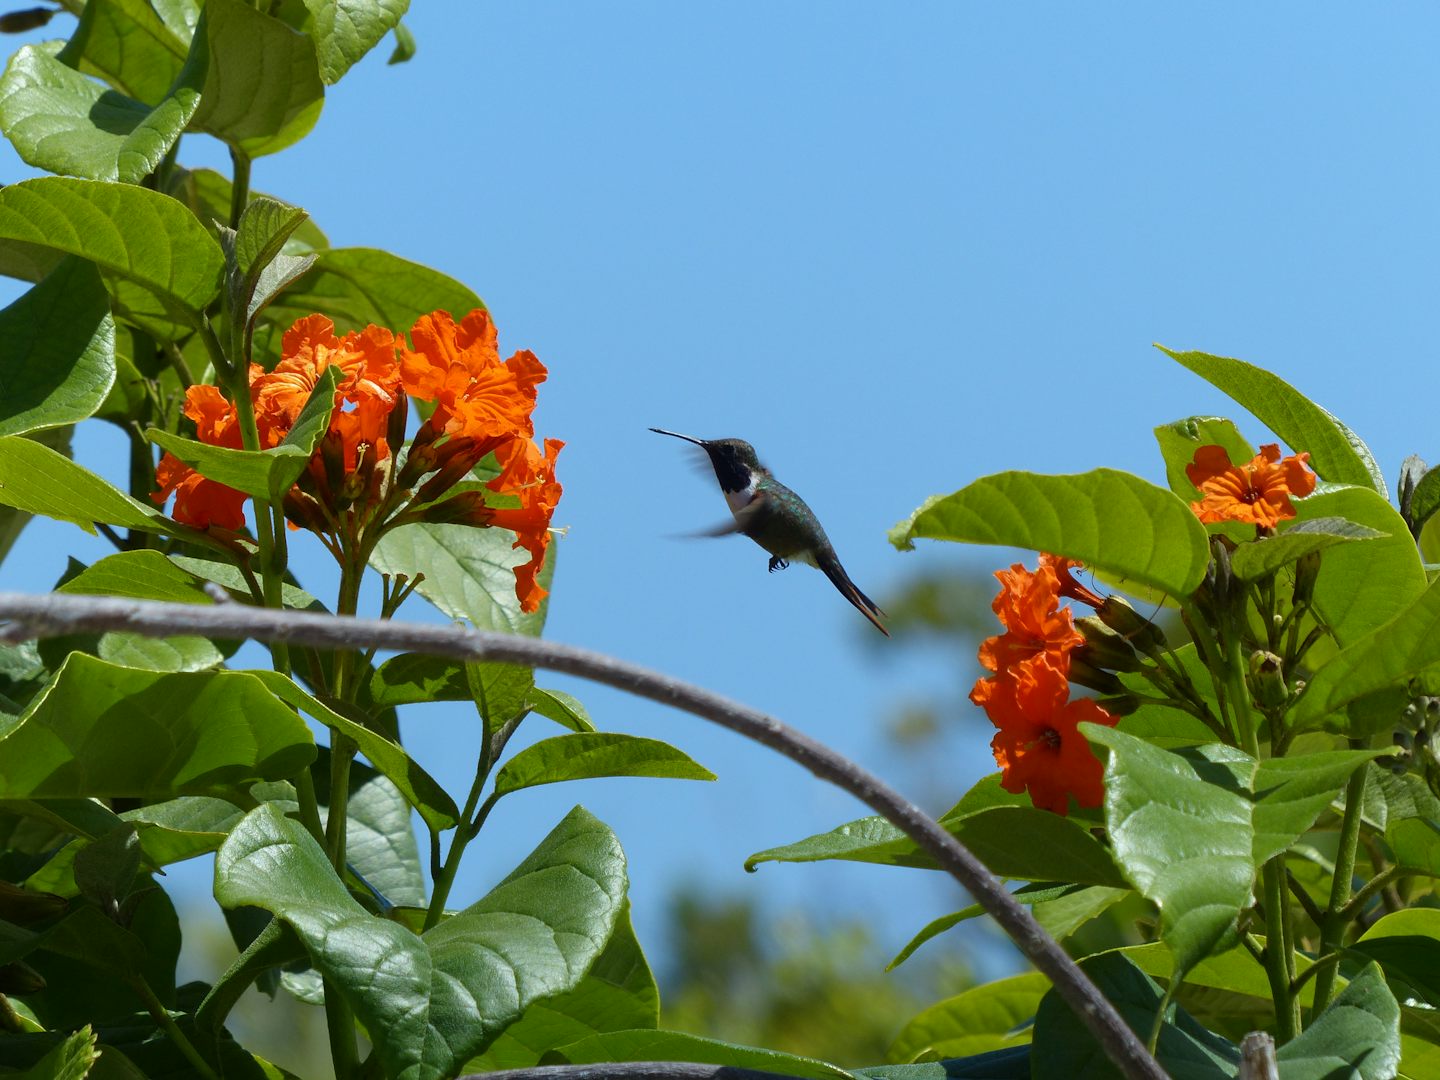 Princess Cays has so much for the cruiser to love, and for this hummingbird, too.